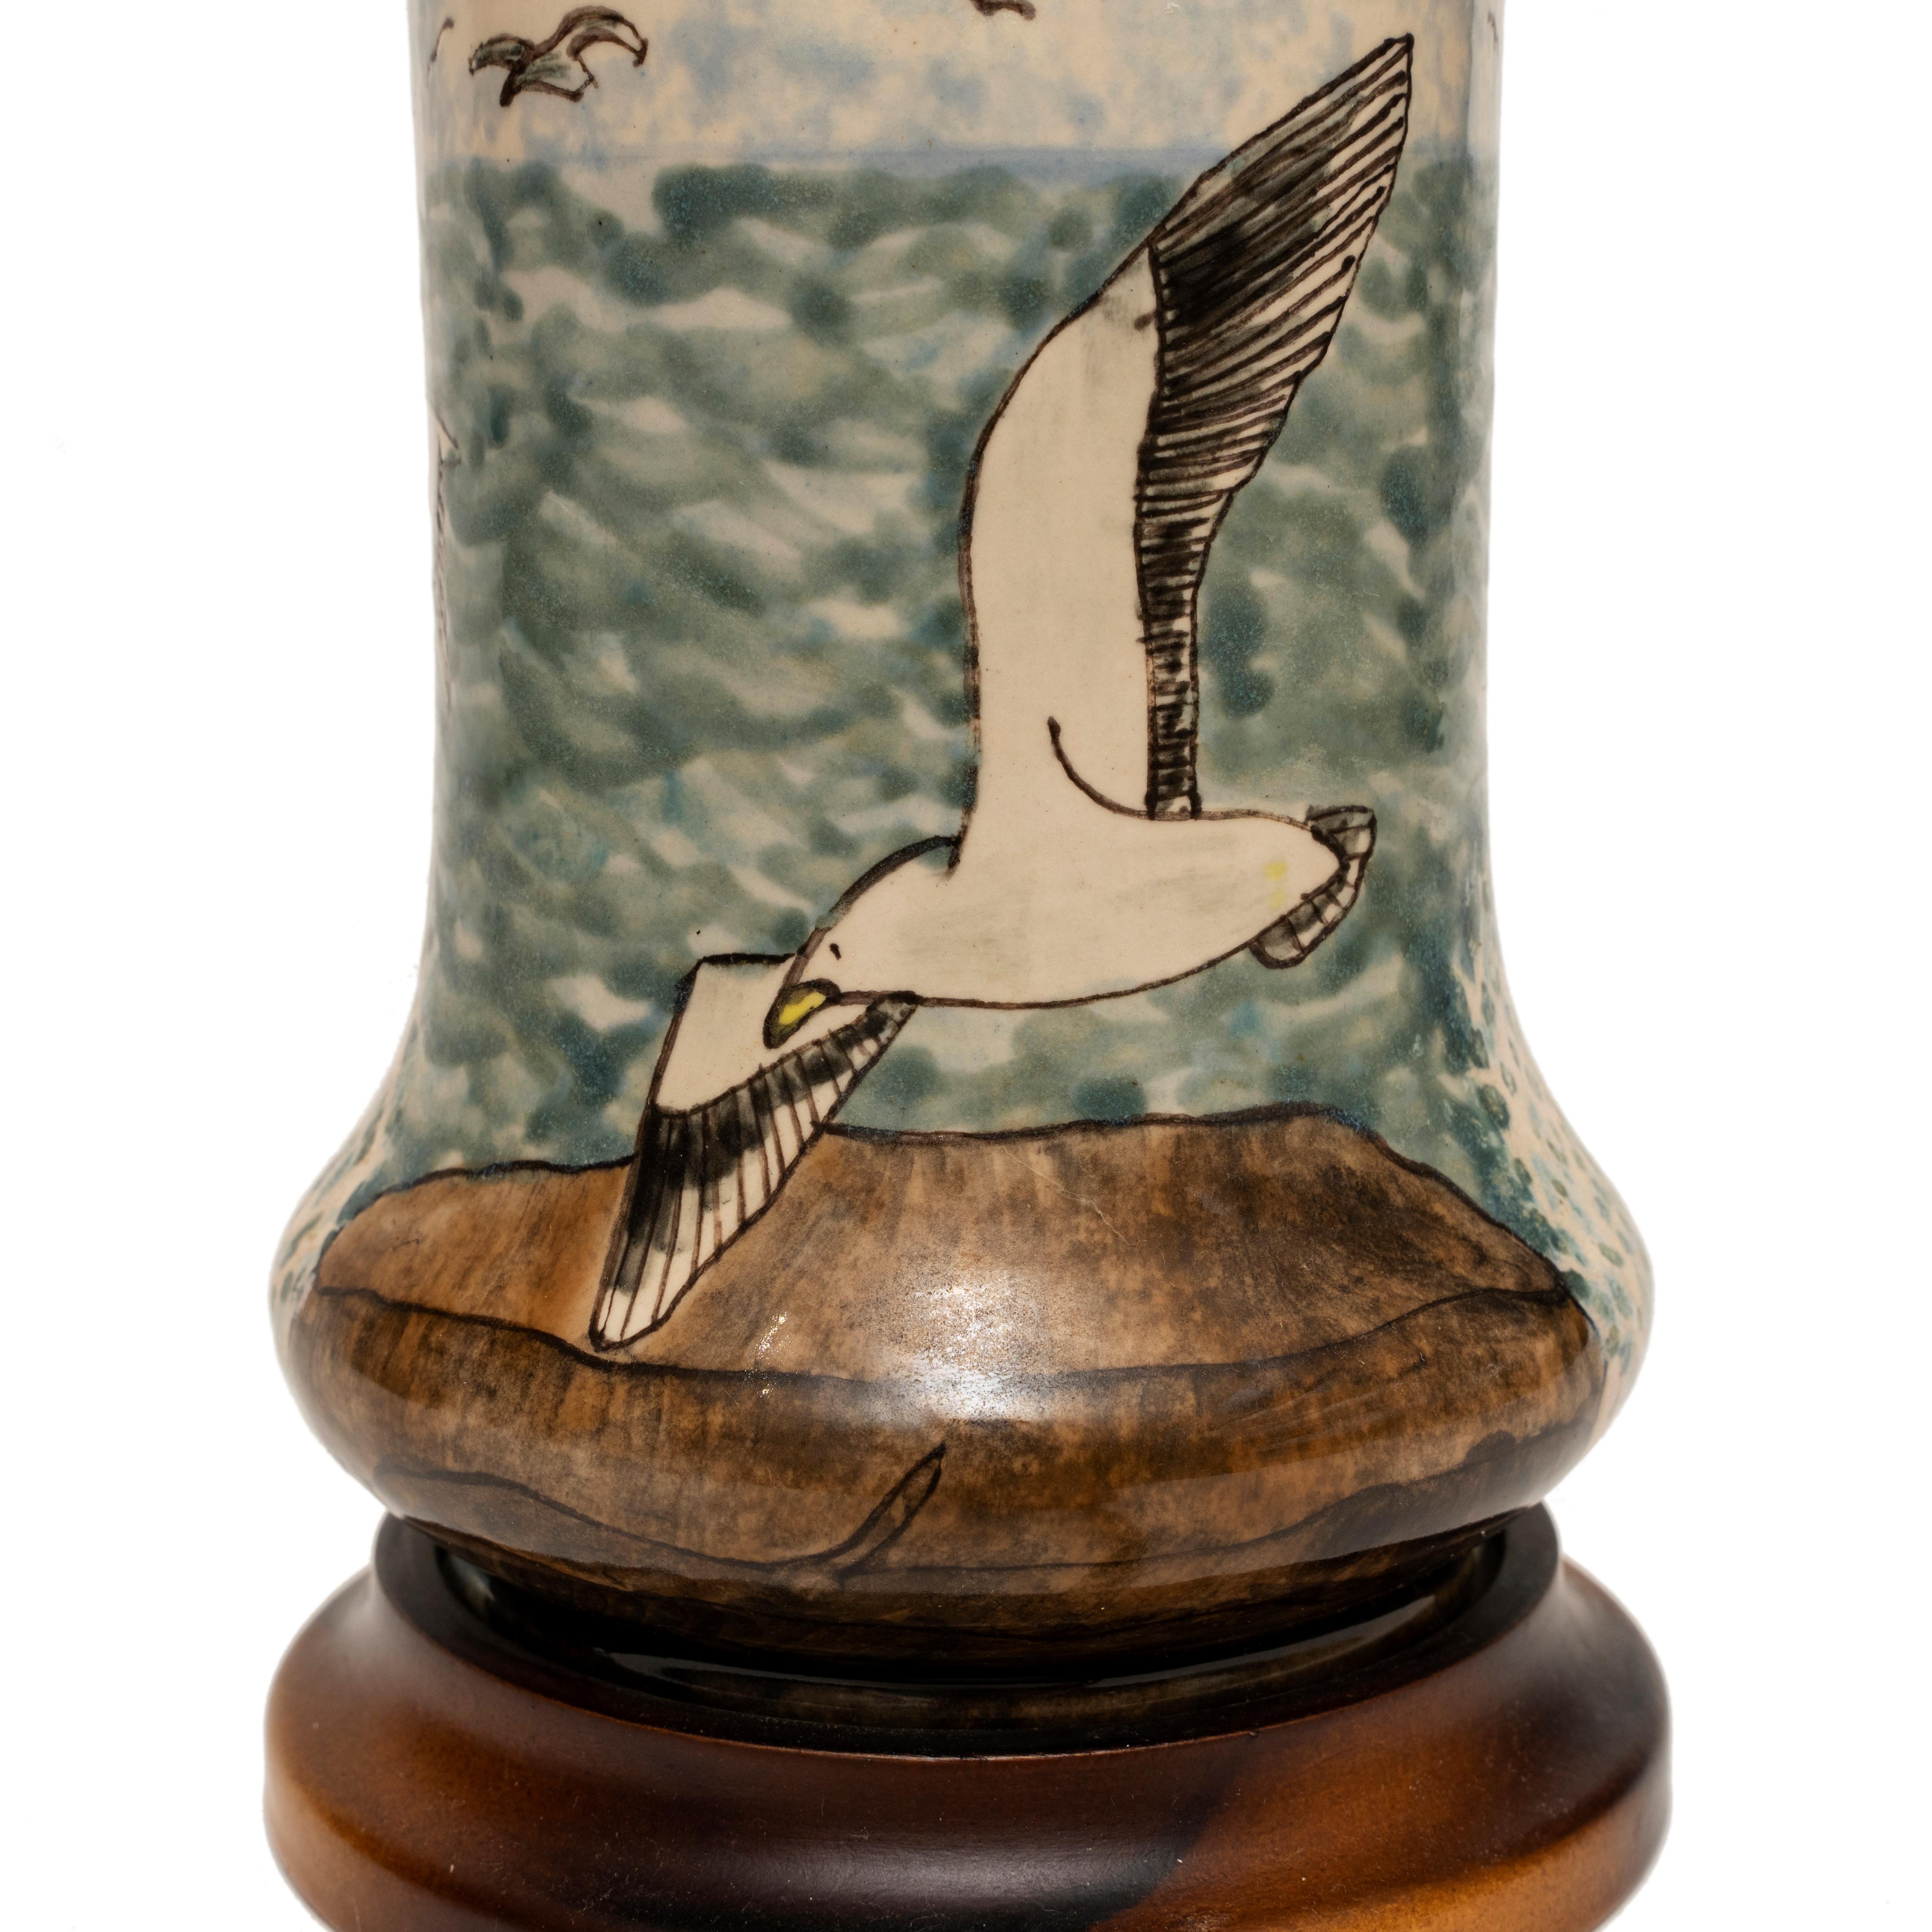 Lamp Table Vase Cobridge Trawler at Sea Seagulls Rock In Excellent Condition For Sale In BUNGAY, SUFFOLK